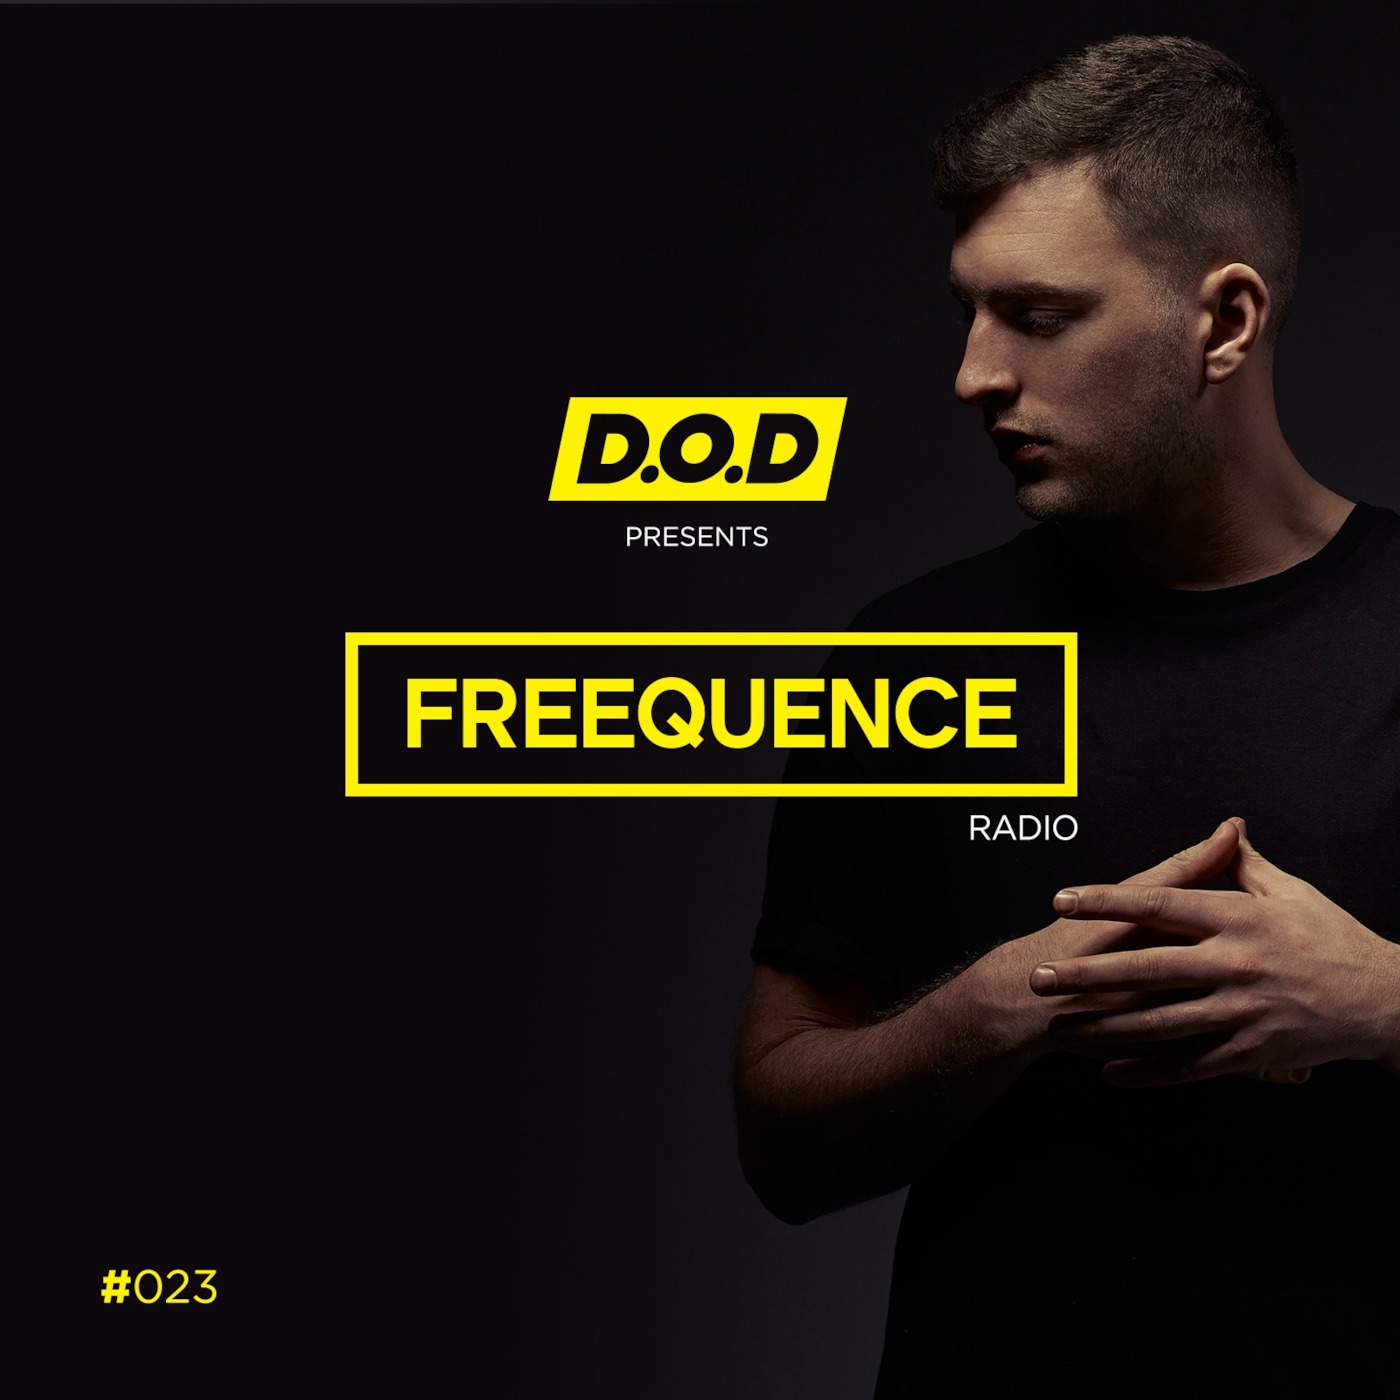 #FREEQUENCE Radio with D.O.D #023